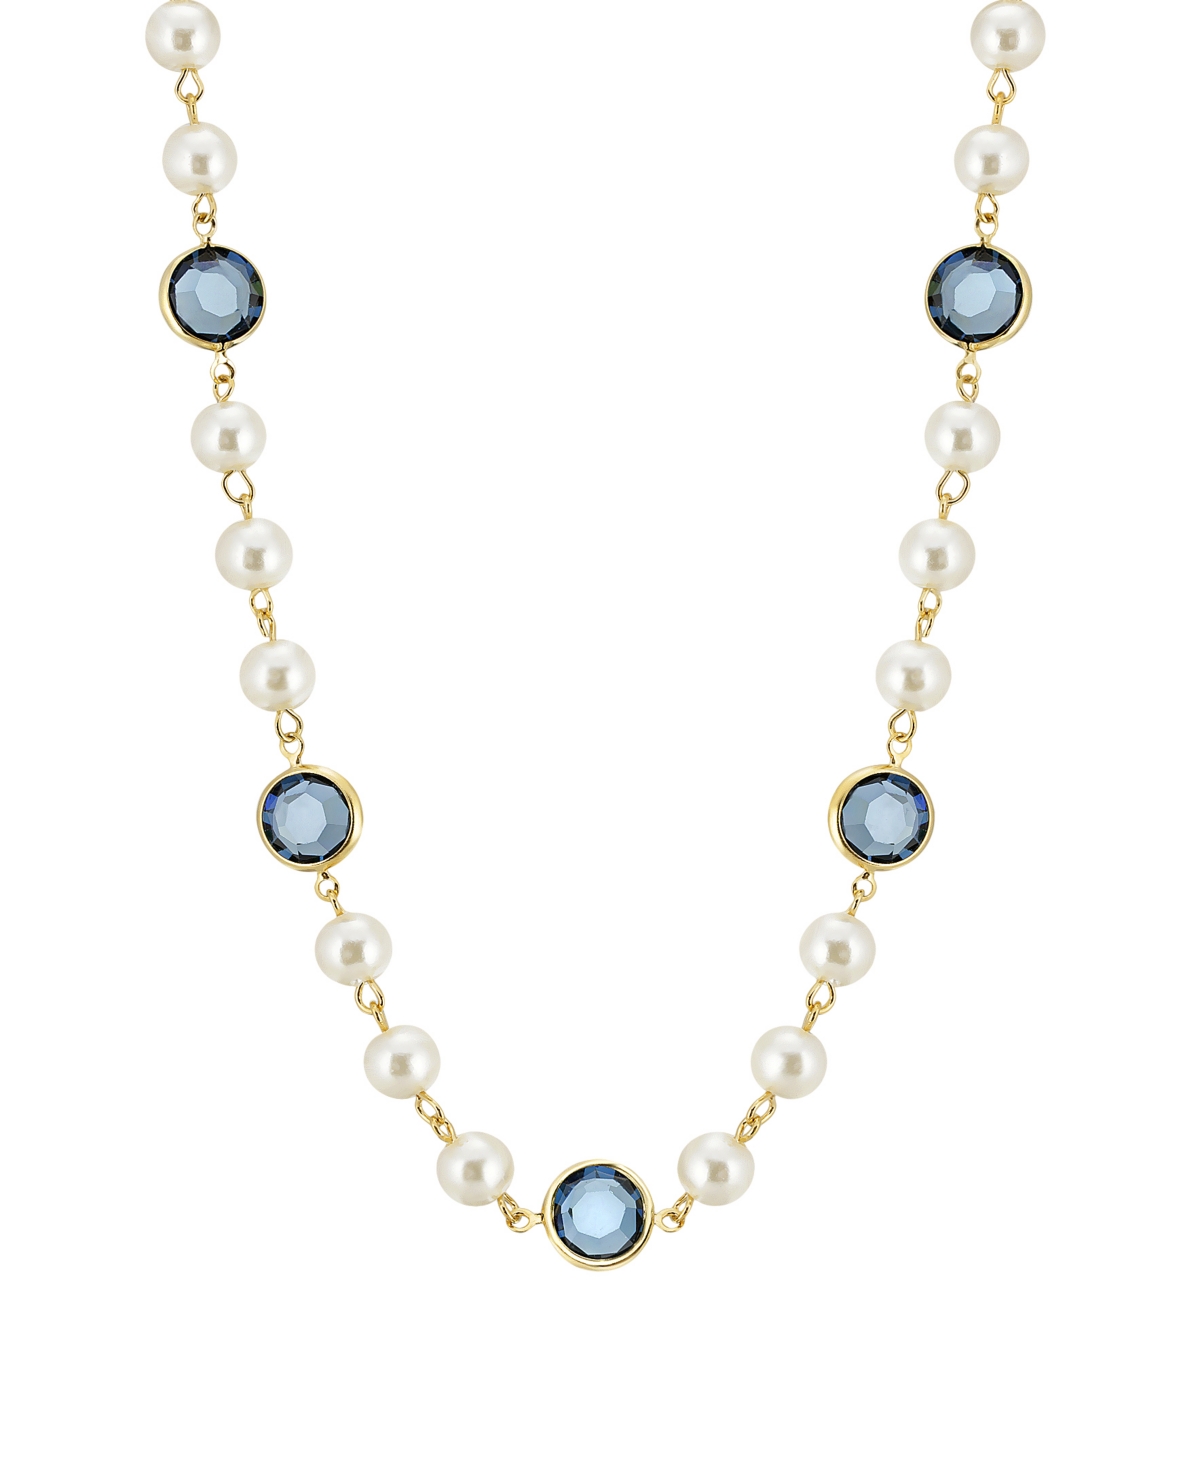 2028 Gold-tone Imitation Pearl With Dark Blue Channels 16" Adjustable Necklace